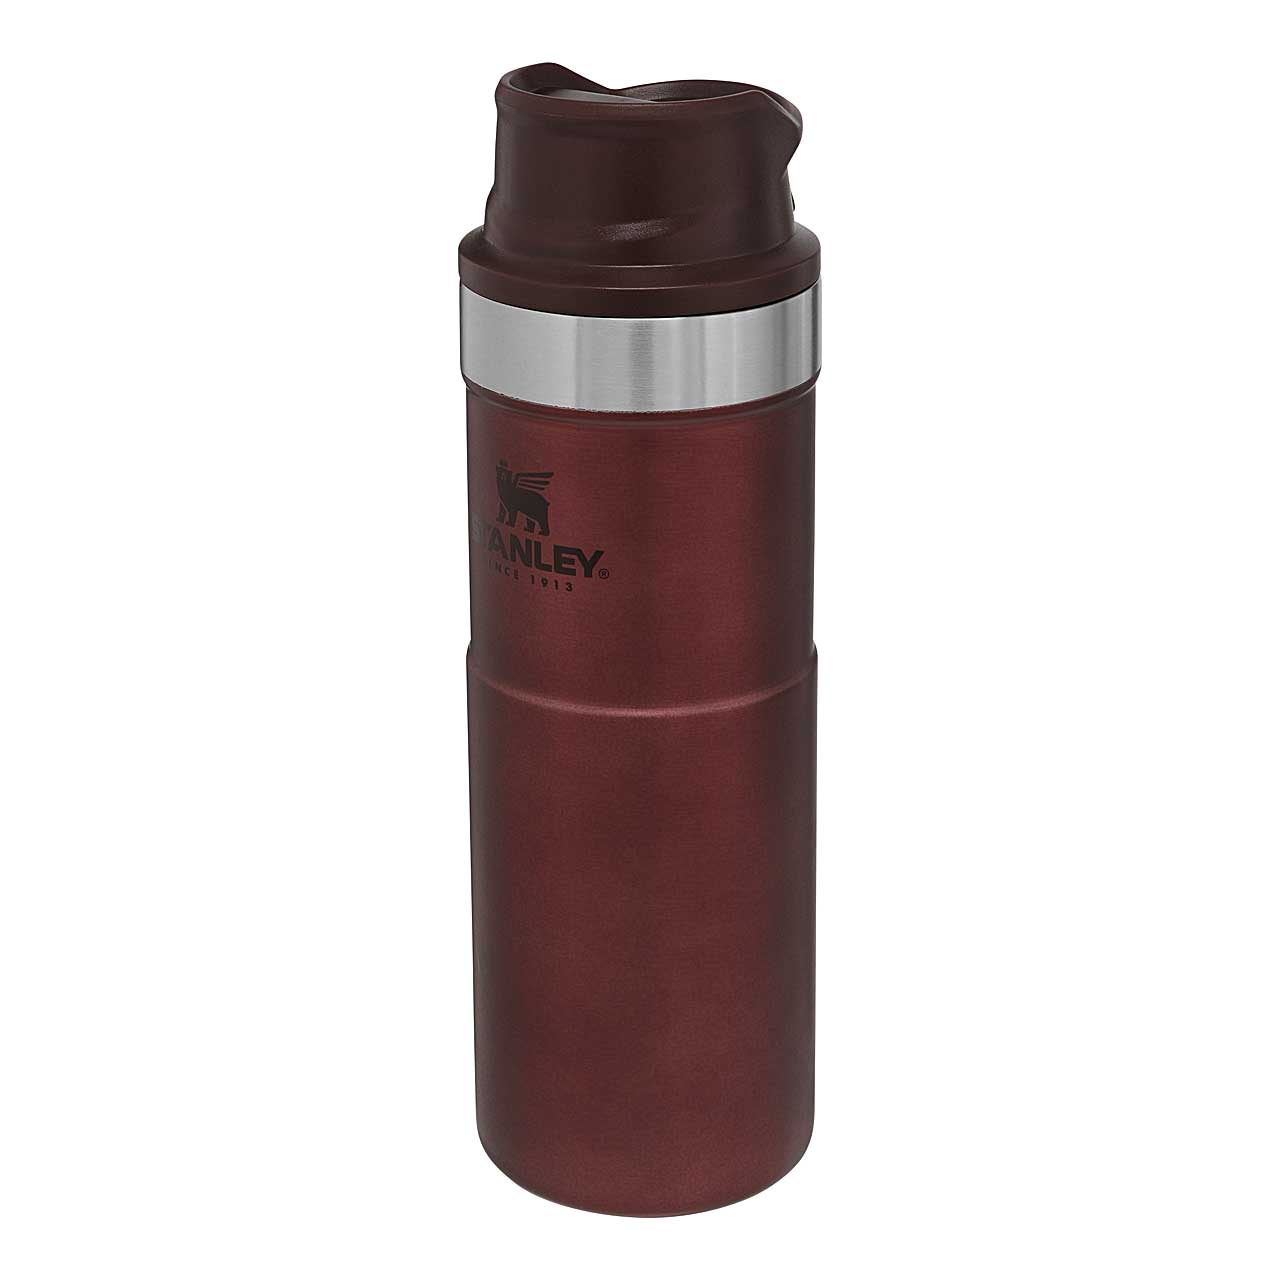 Productfoto van Stanley Classic Trigger-Action Travel Thermobeker 0.47 Liter - Wine Red